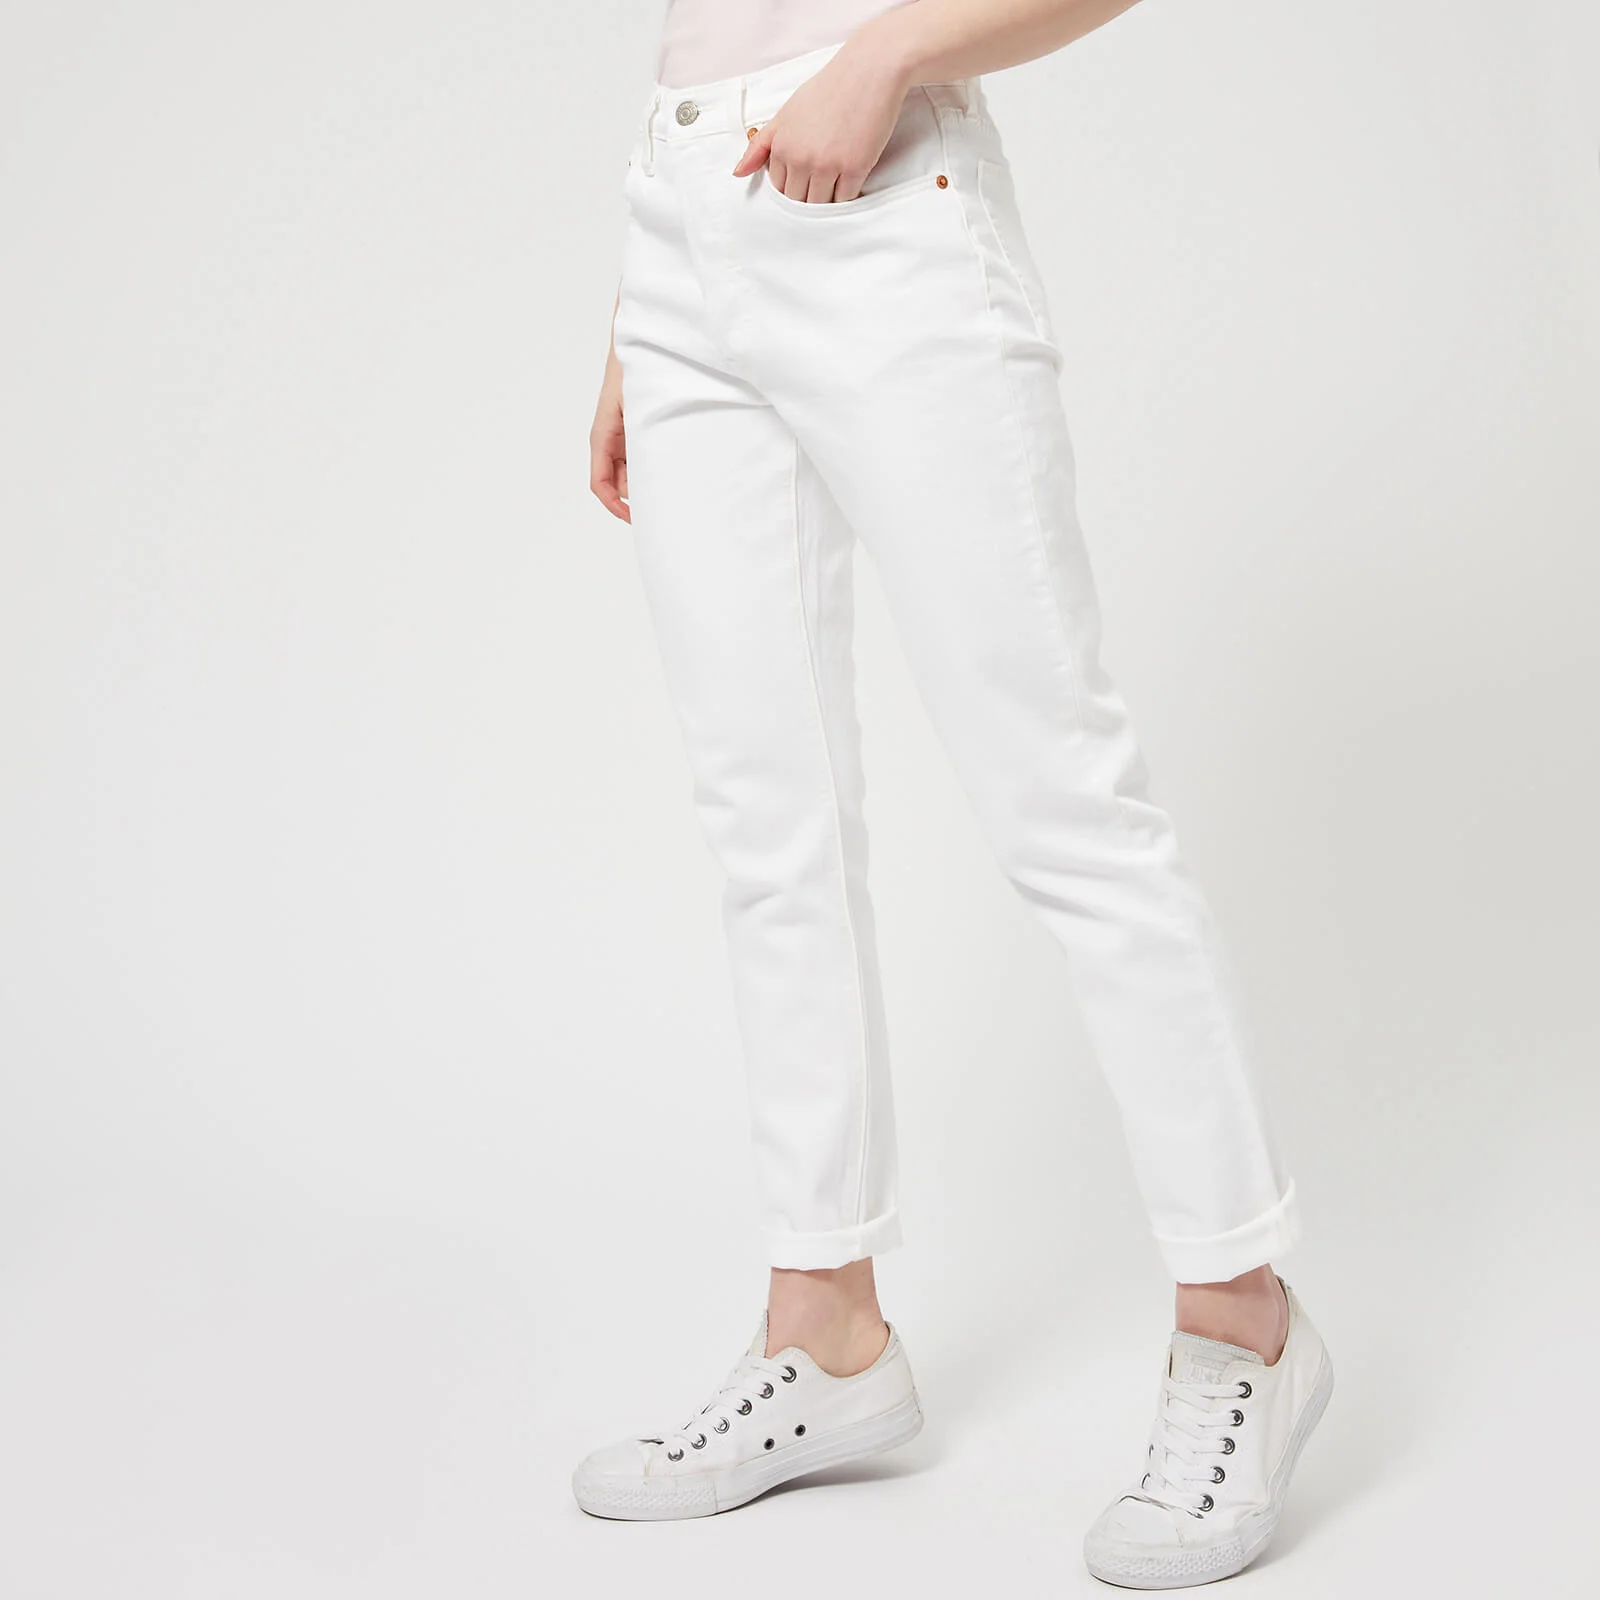 Levi's Women's 501 Skinny Jeans - In the Clouds Image 1